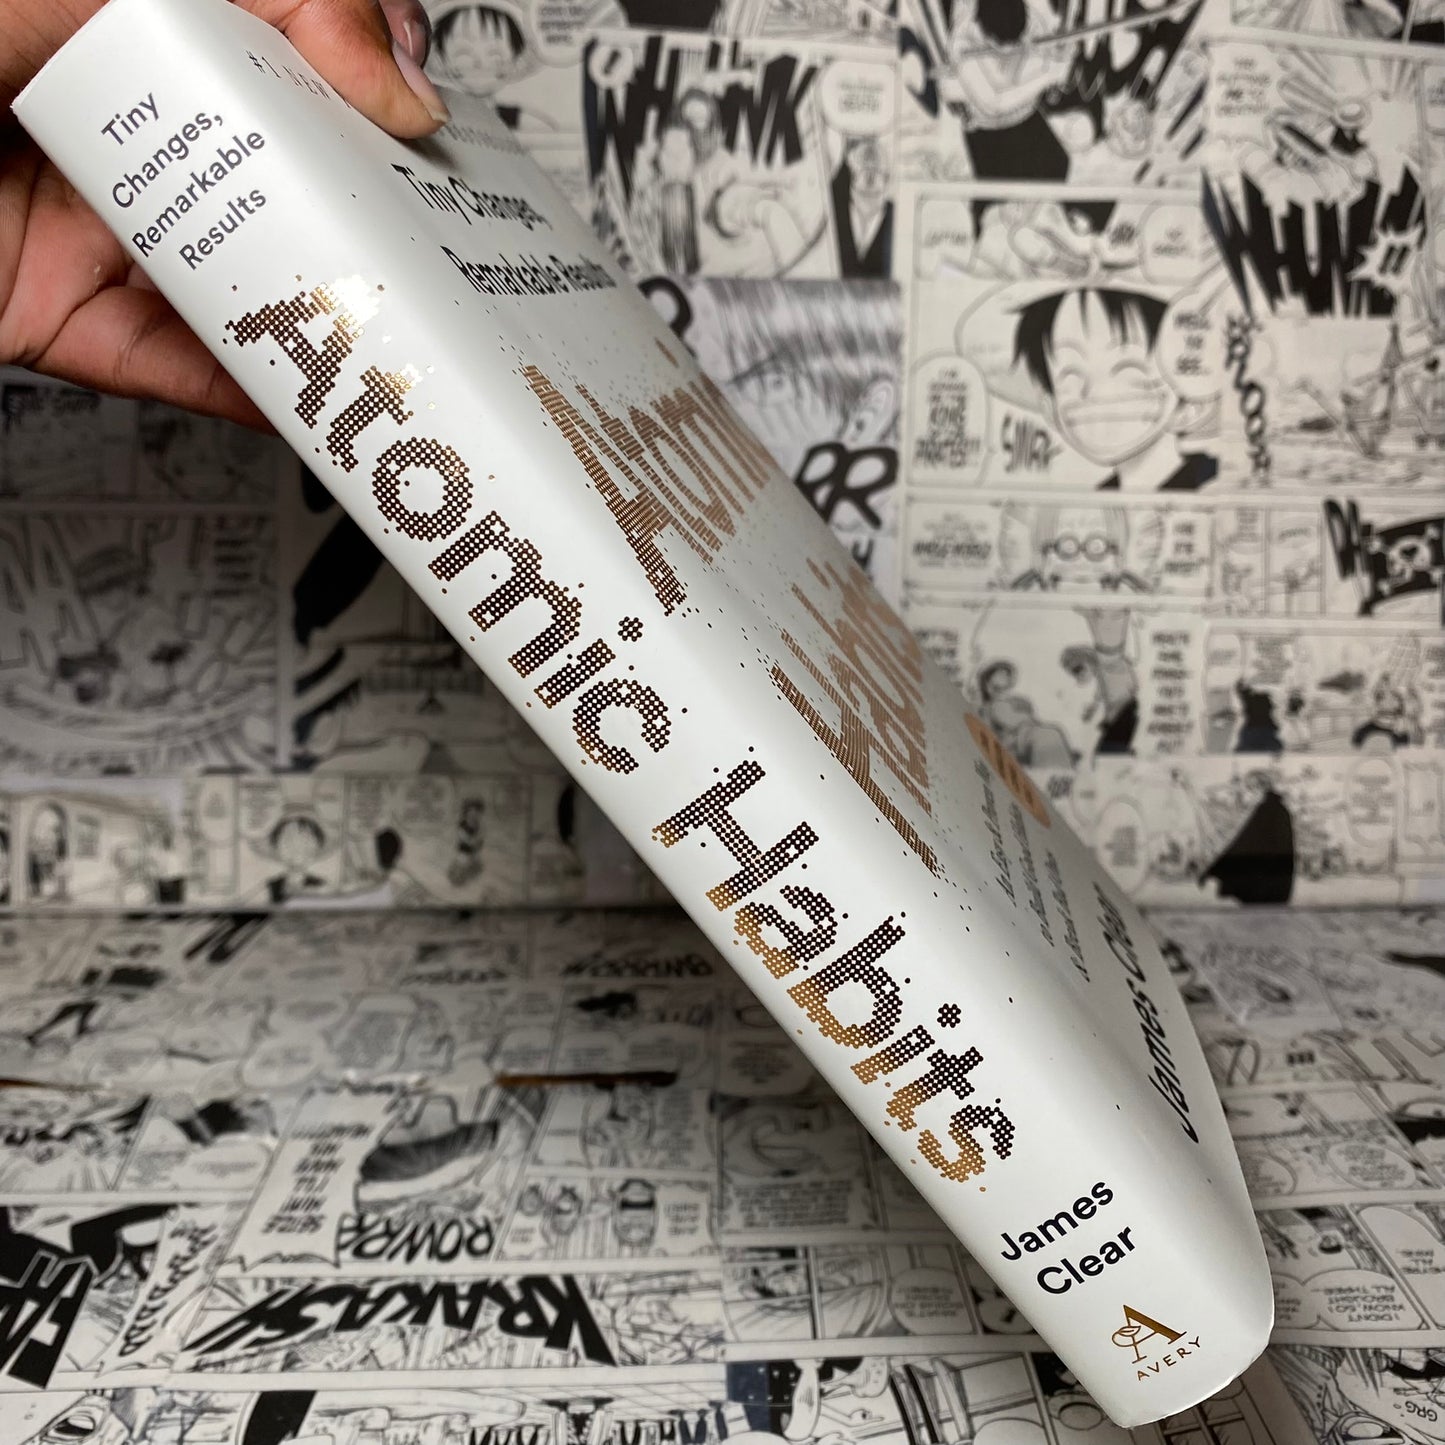 Atomic Habits: An Easy & Proven Way to Build Good Habits & Break Bad Ones Hardcover by James Clear